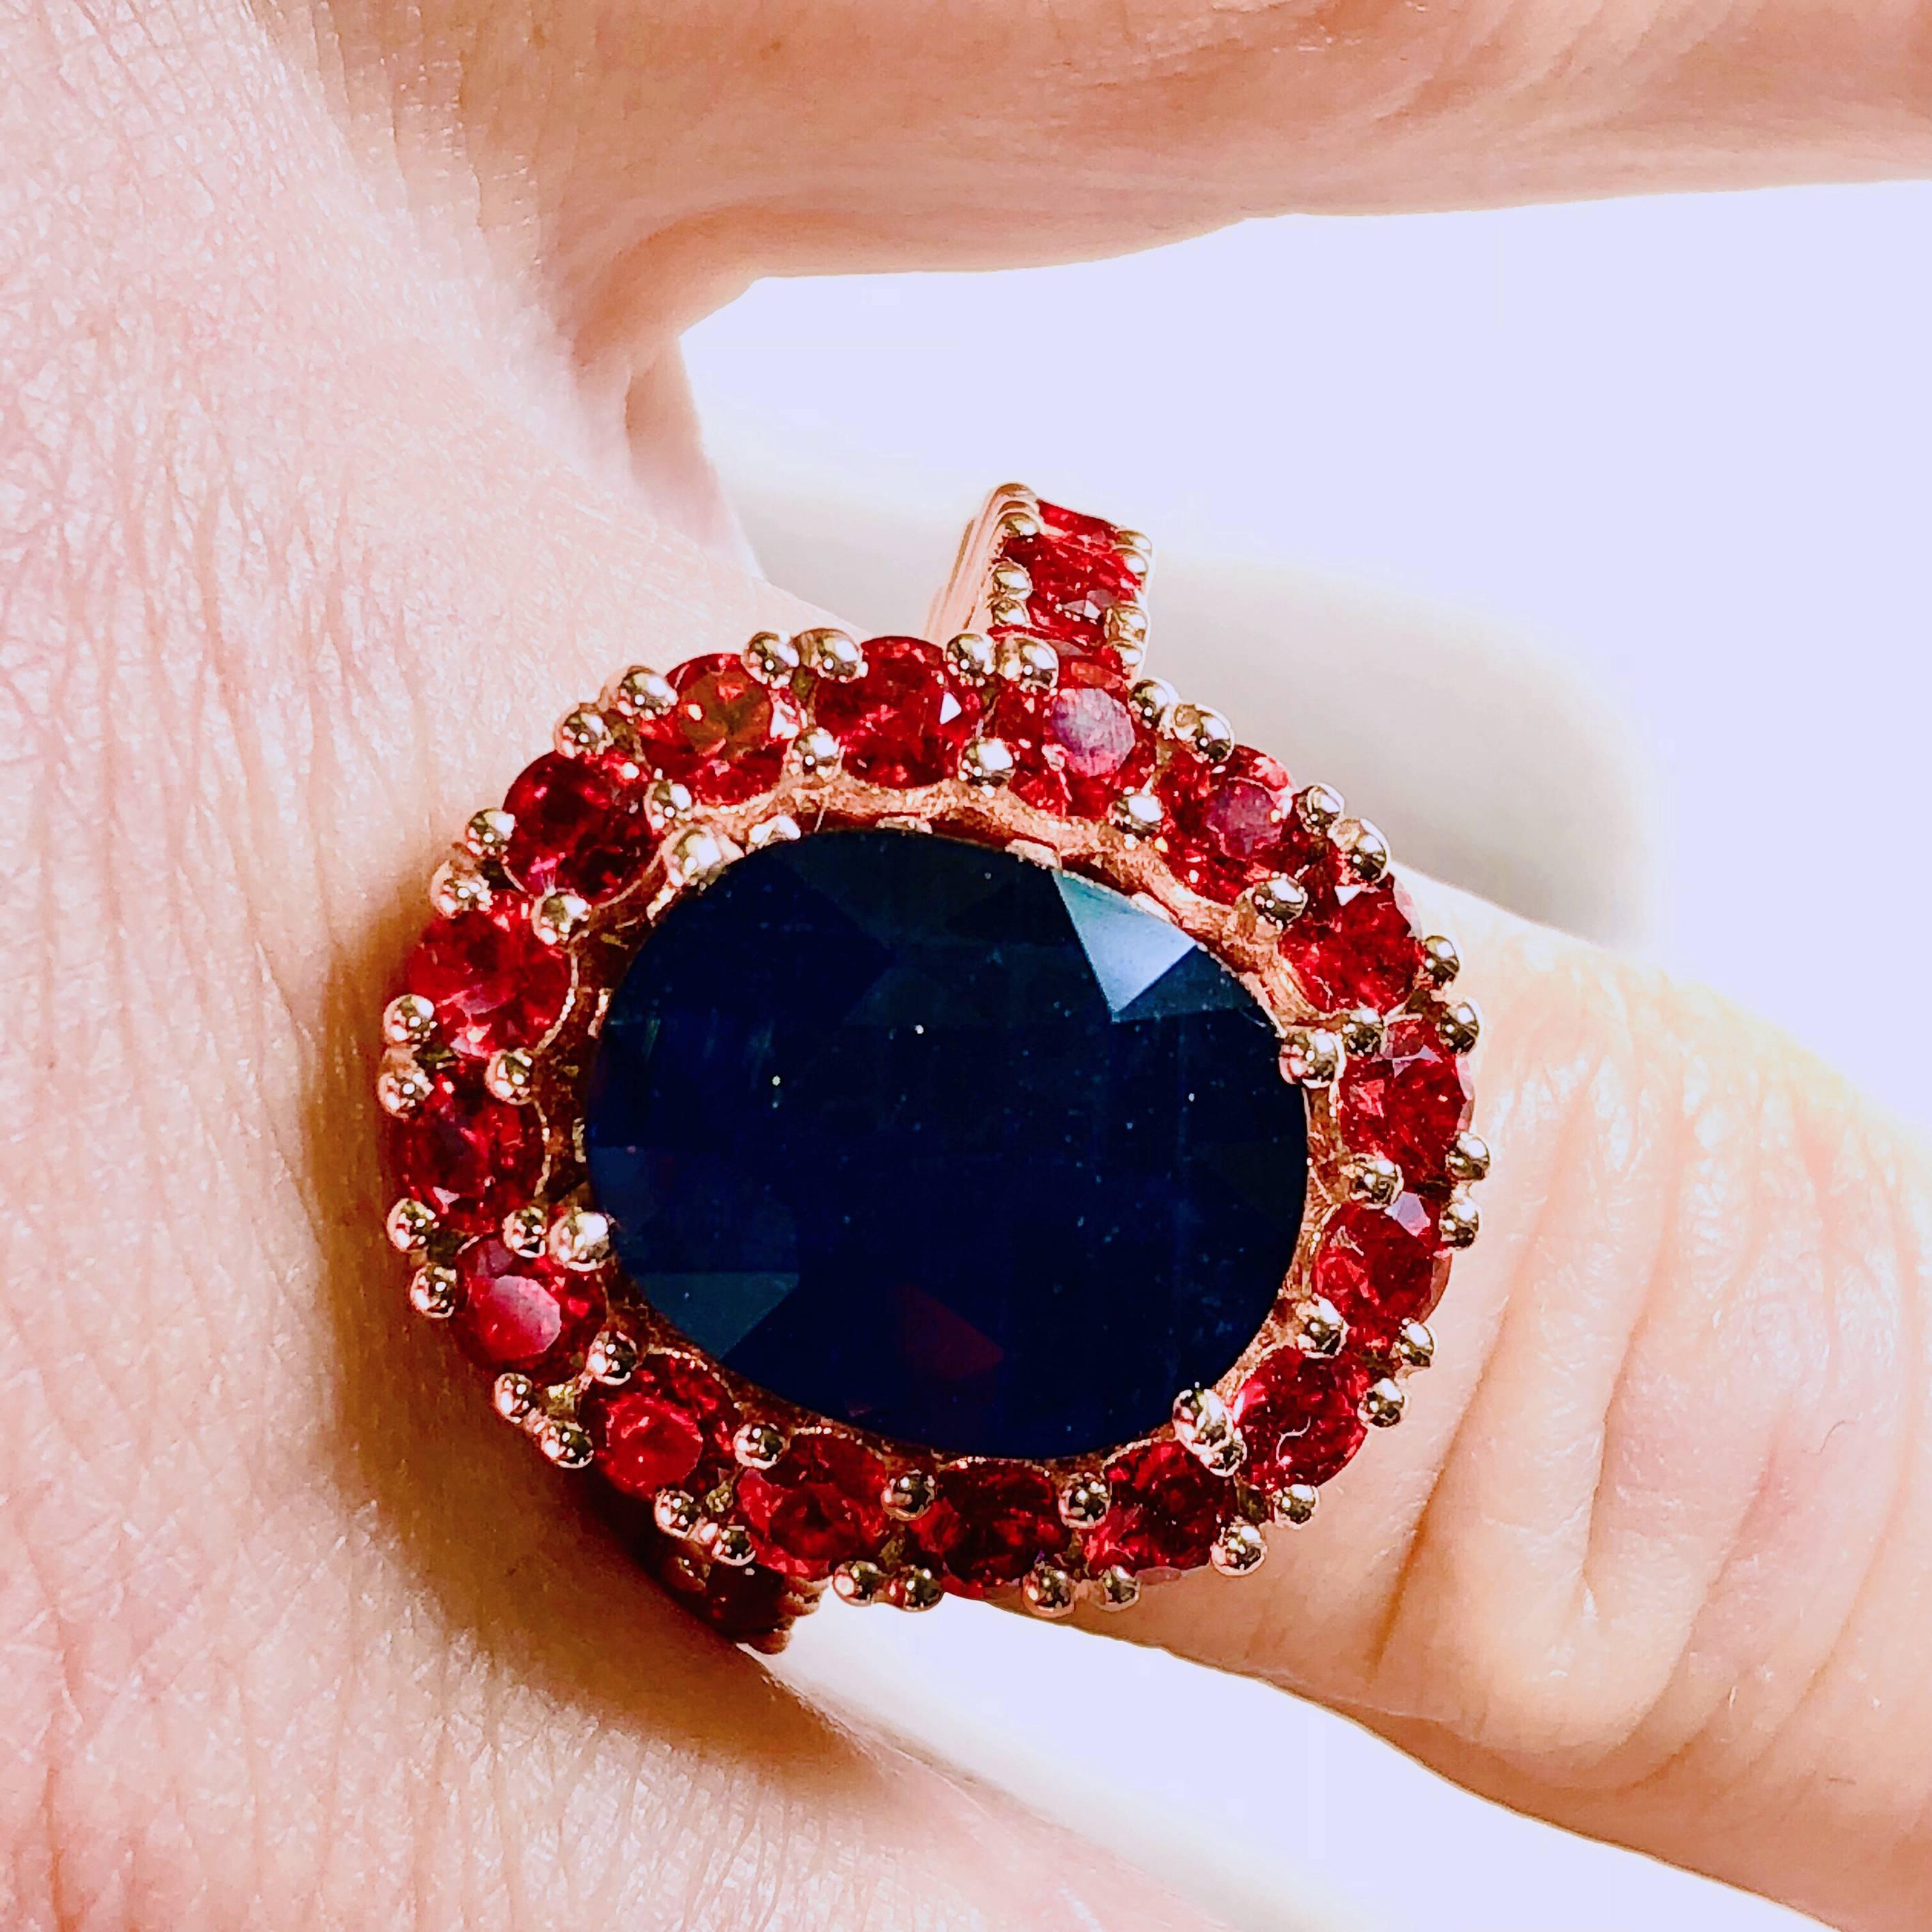 6.05 Carat Natural Oval Sapphire 3.81 Carat Red Spinel Cocktail Ring 6